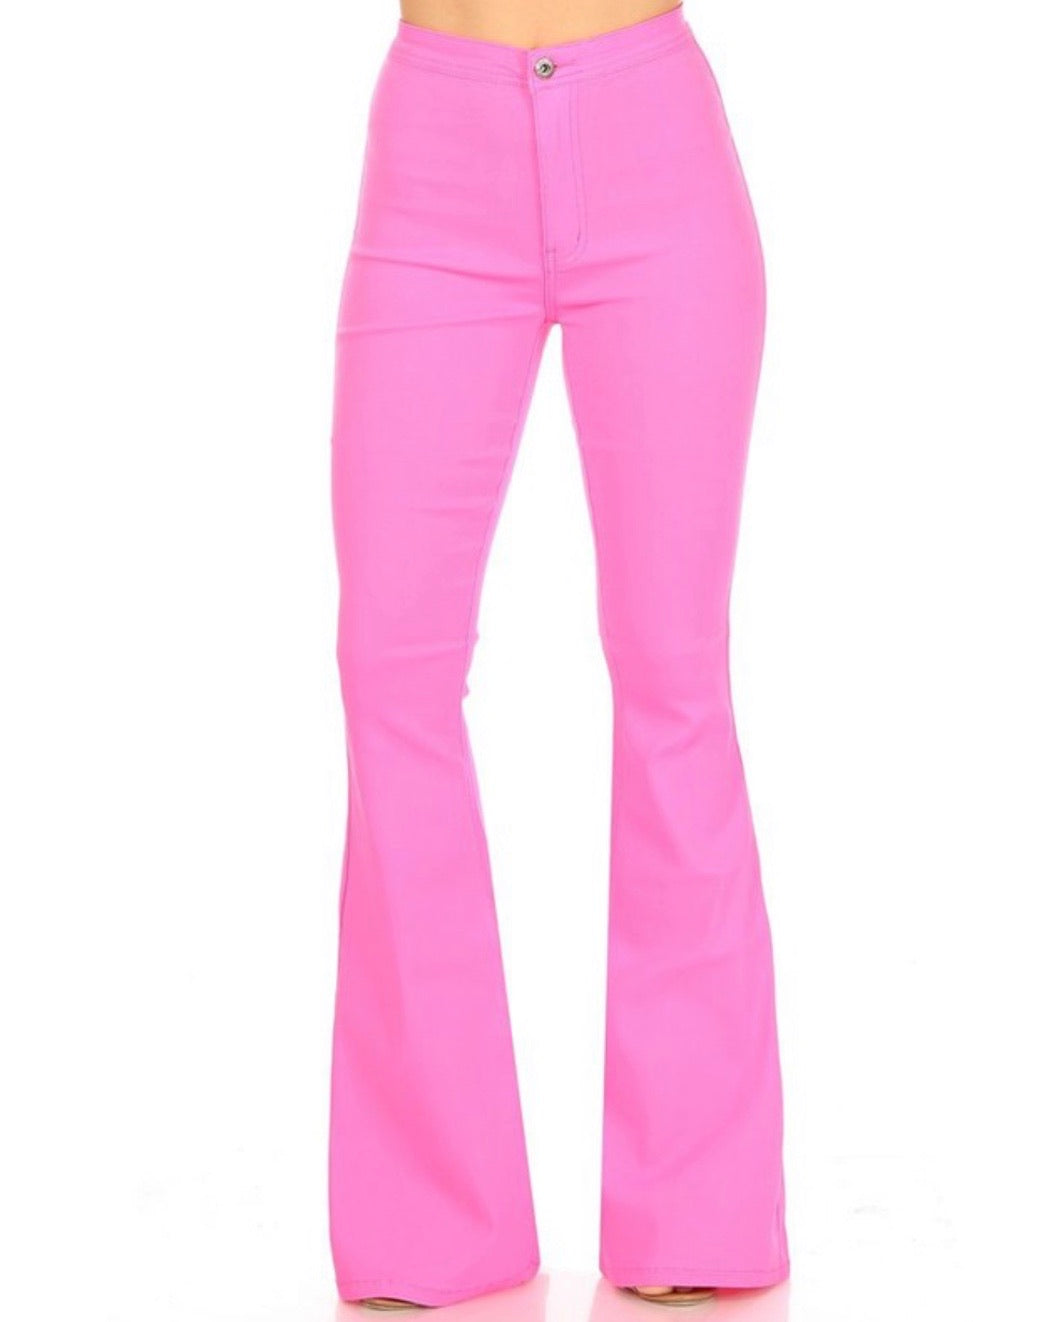 Hot Pink Basic Jersey Flared Trouser